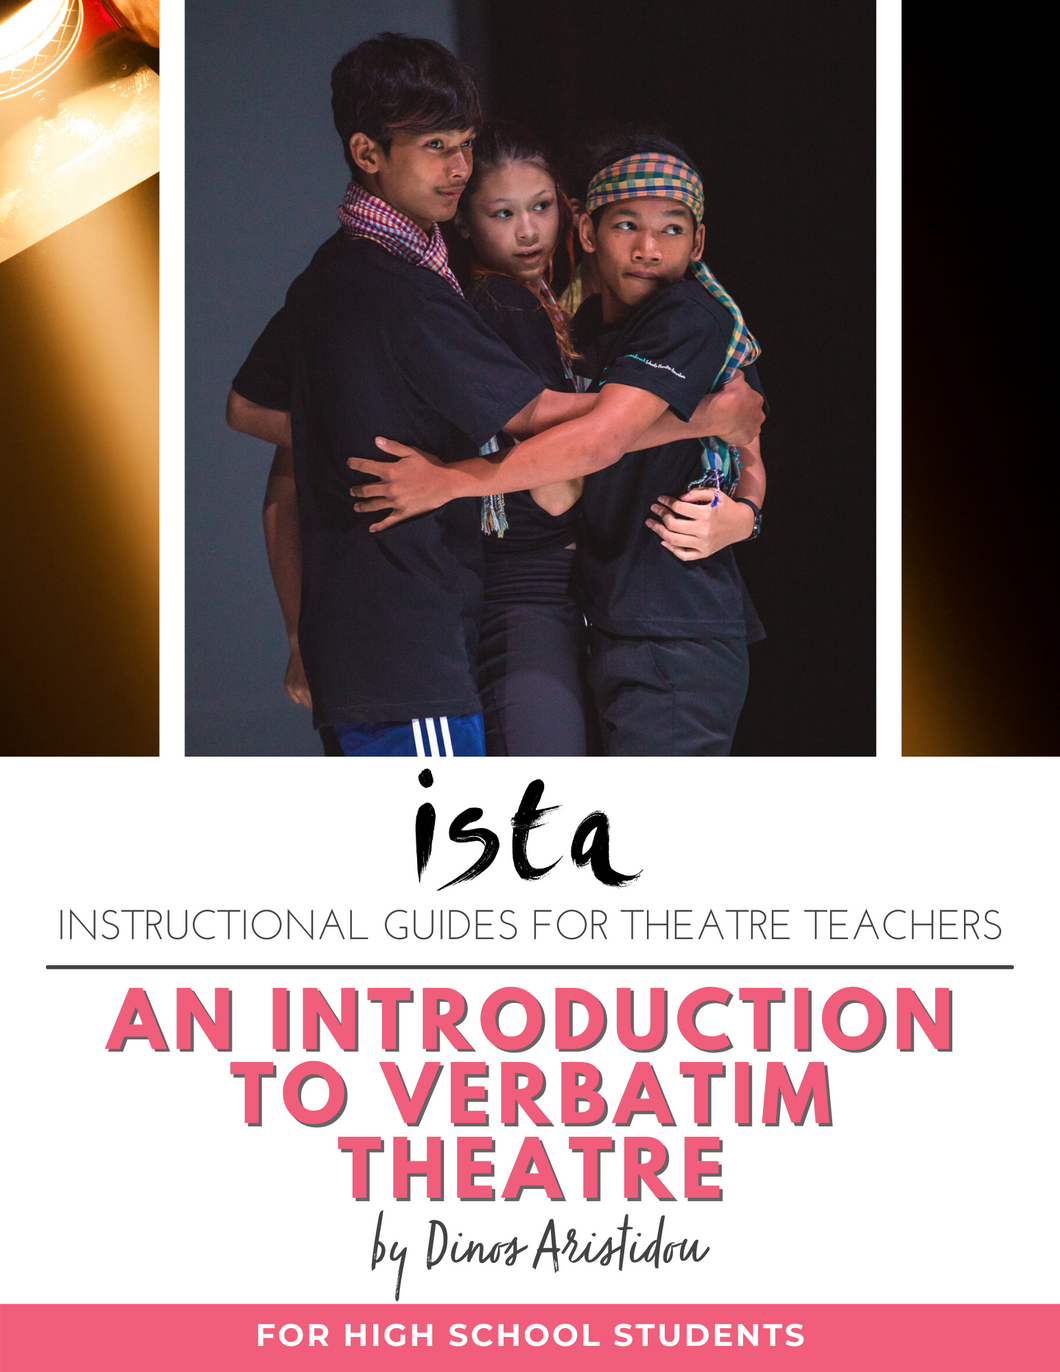 Digital instructional guides for theatre teachers: An introduction to Verbatim theatre